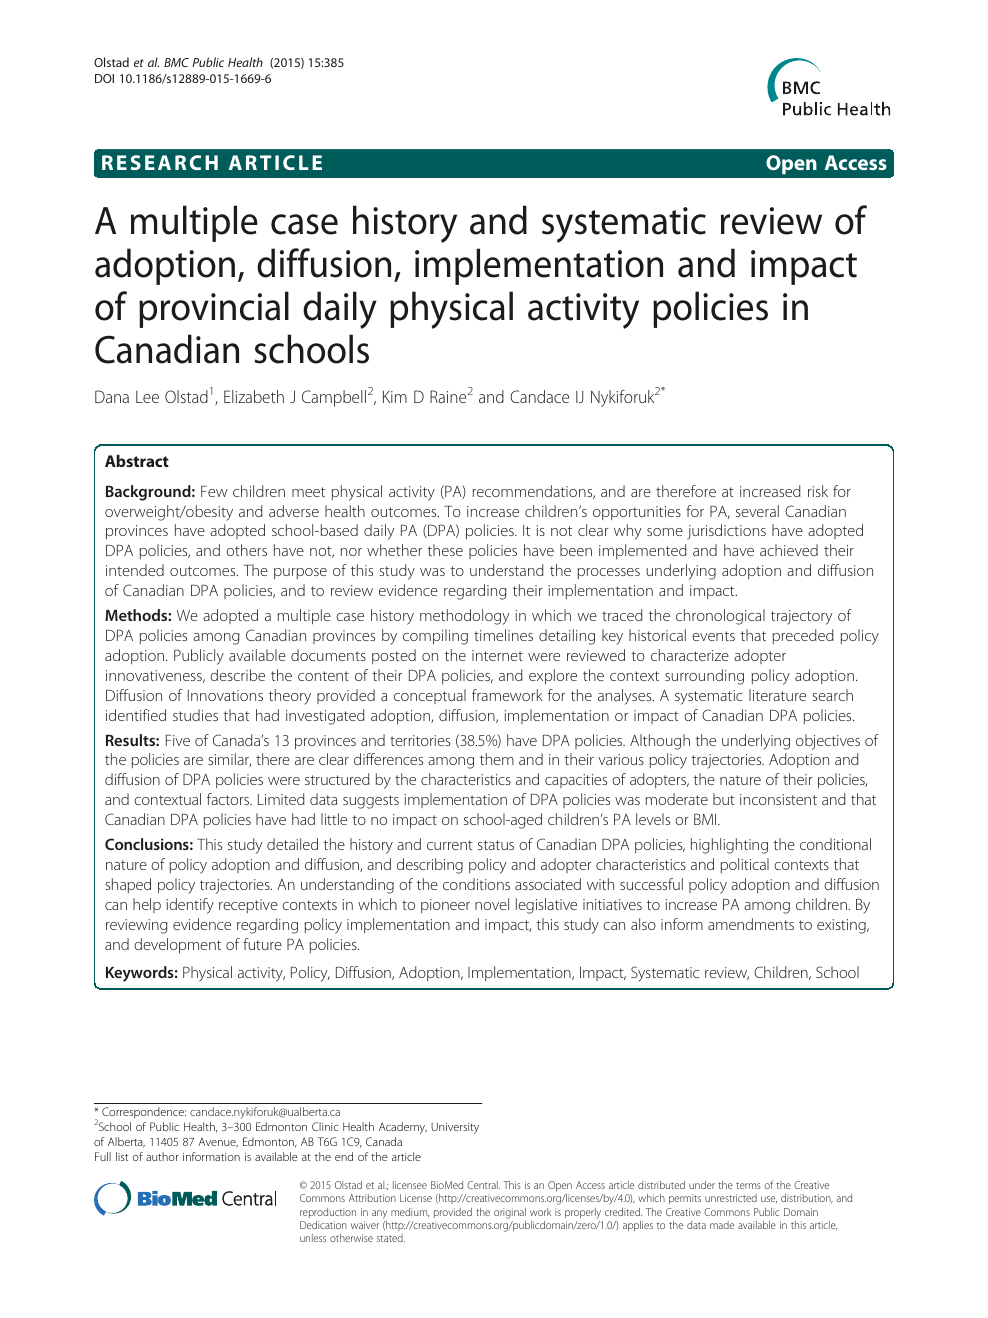 A multiple case history and systematic review of adoption, diffusion, implementation and impact of provincial daily physical activity policies in Canadian schools